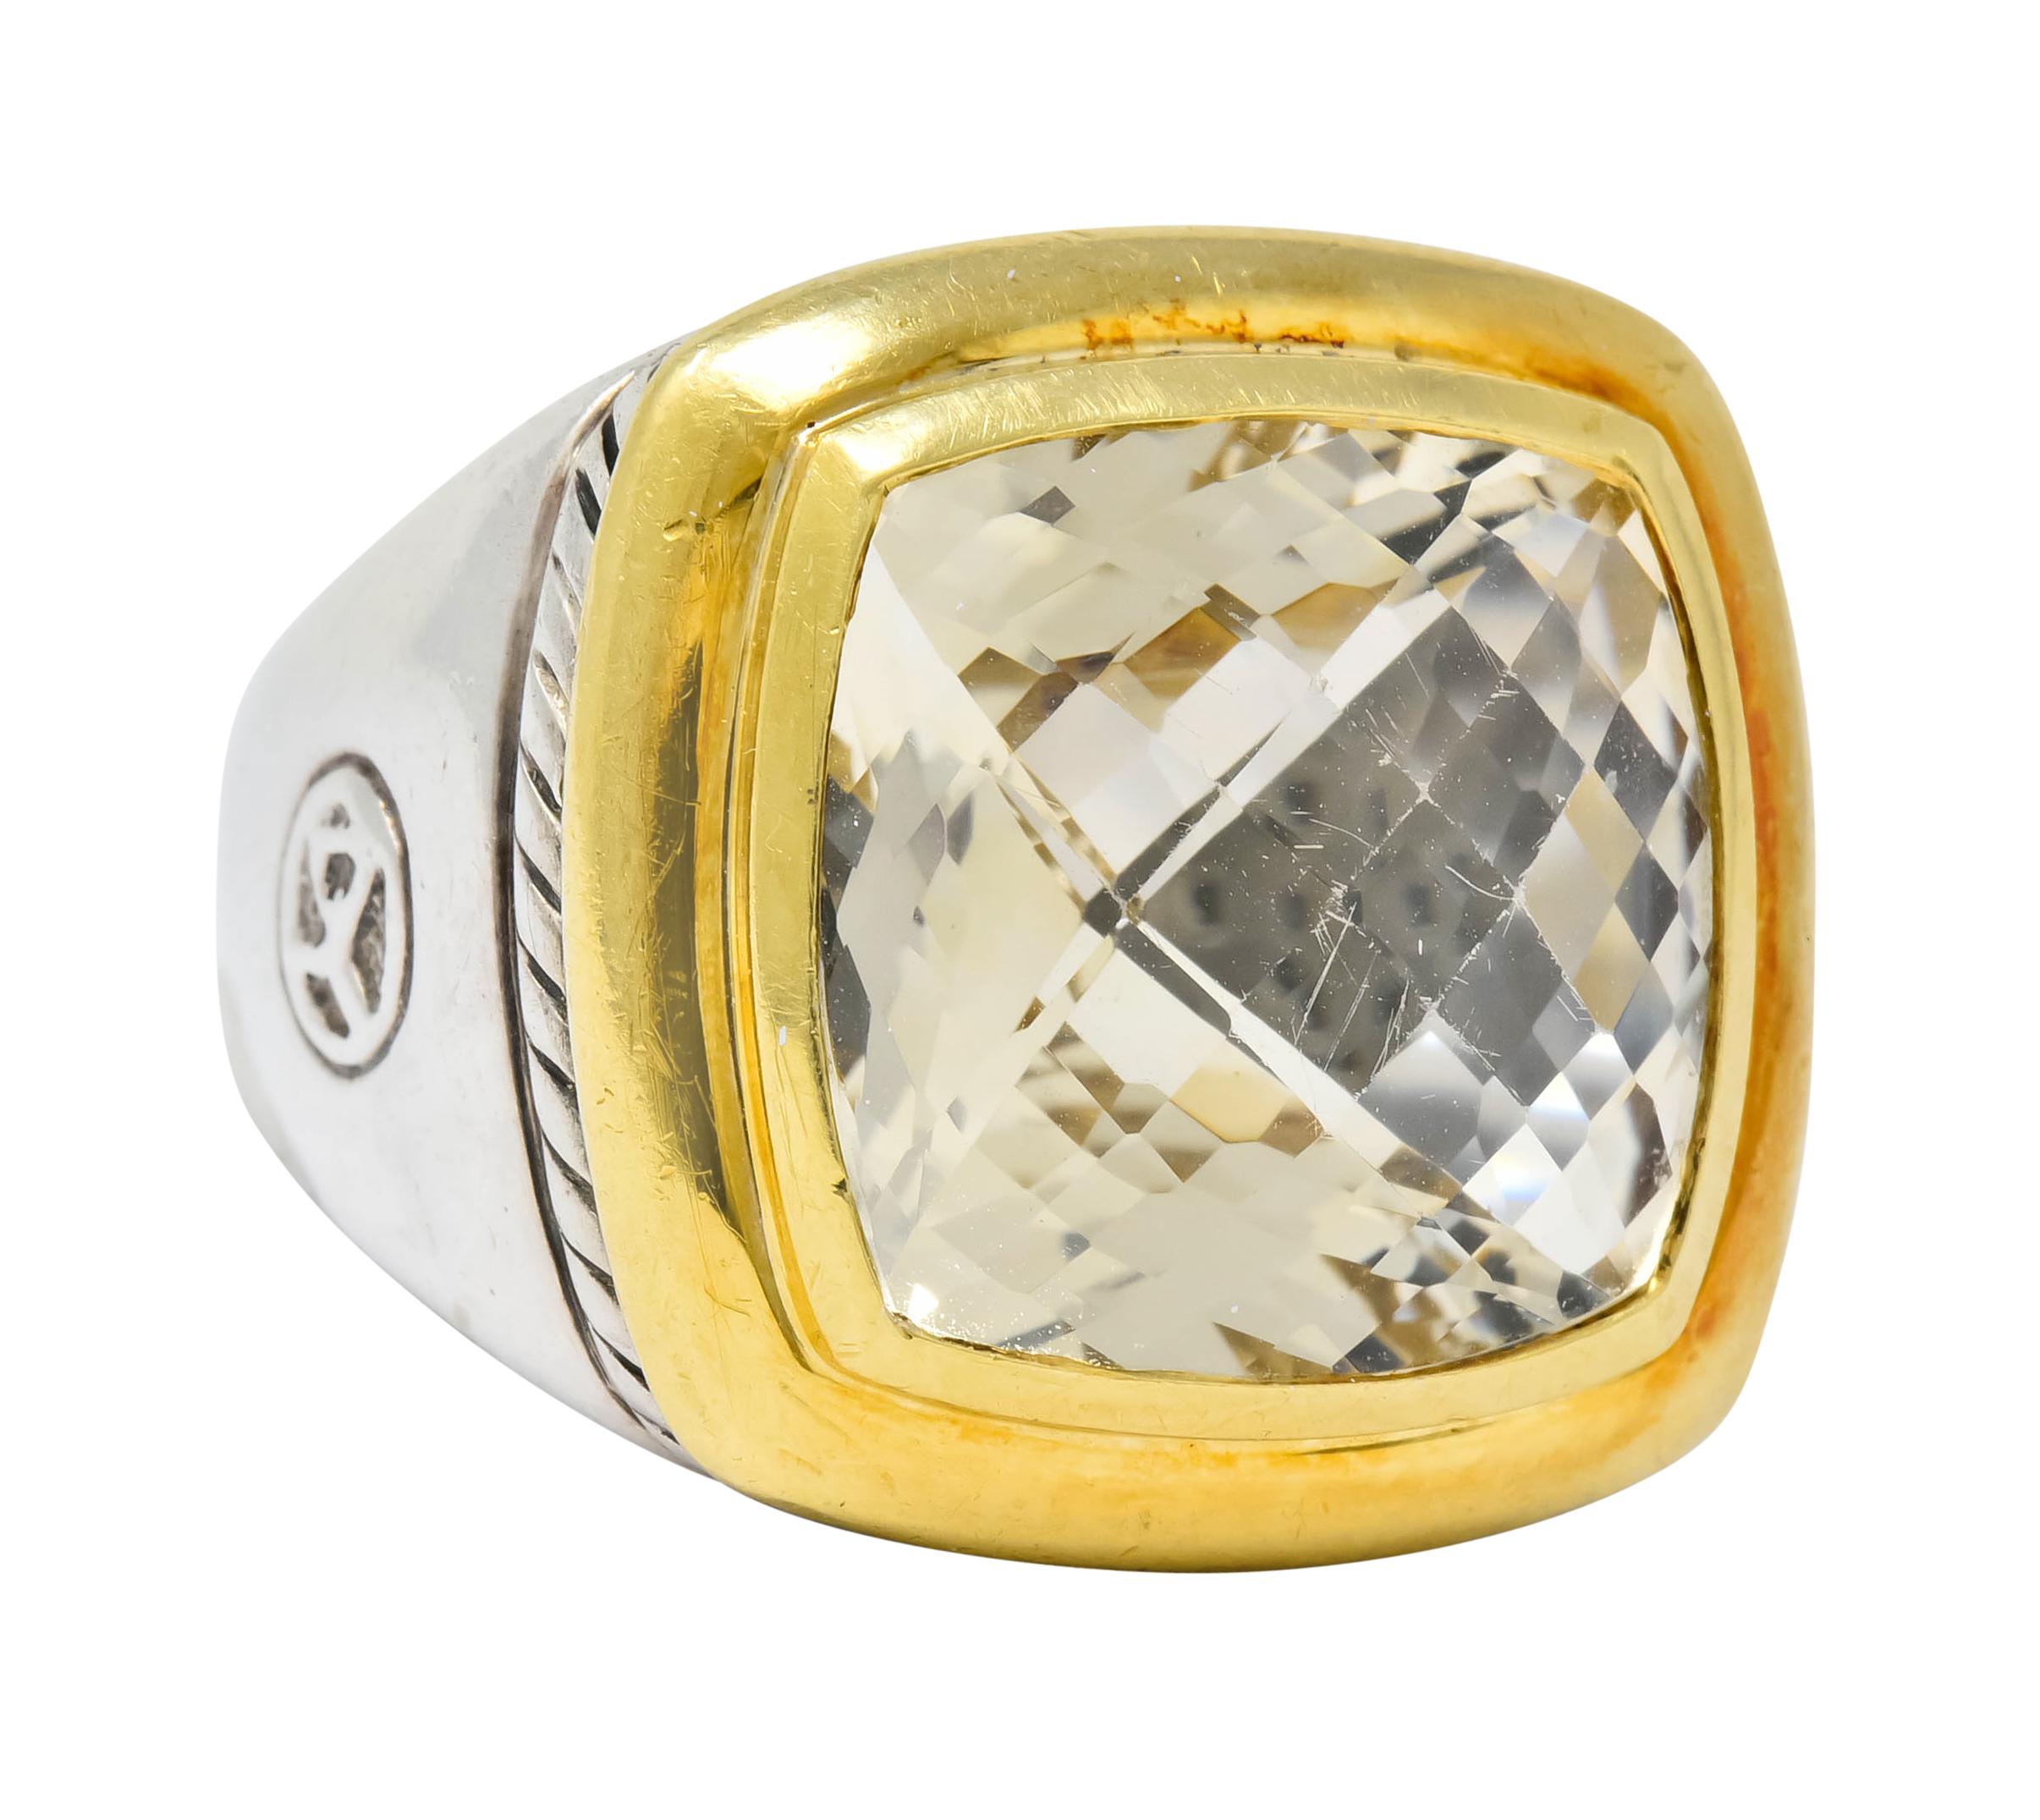 Centering a cushion cut checkerboard colorless quartz measuring approximately 14.0 x 14.0 mm

Bezel set in a polished gold surround offset by twisted cable motif deeply engraved into silver mounting

One shoulder features a highly rendered maker's